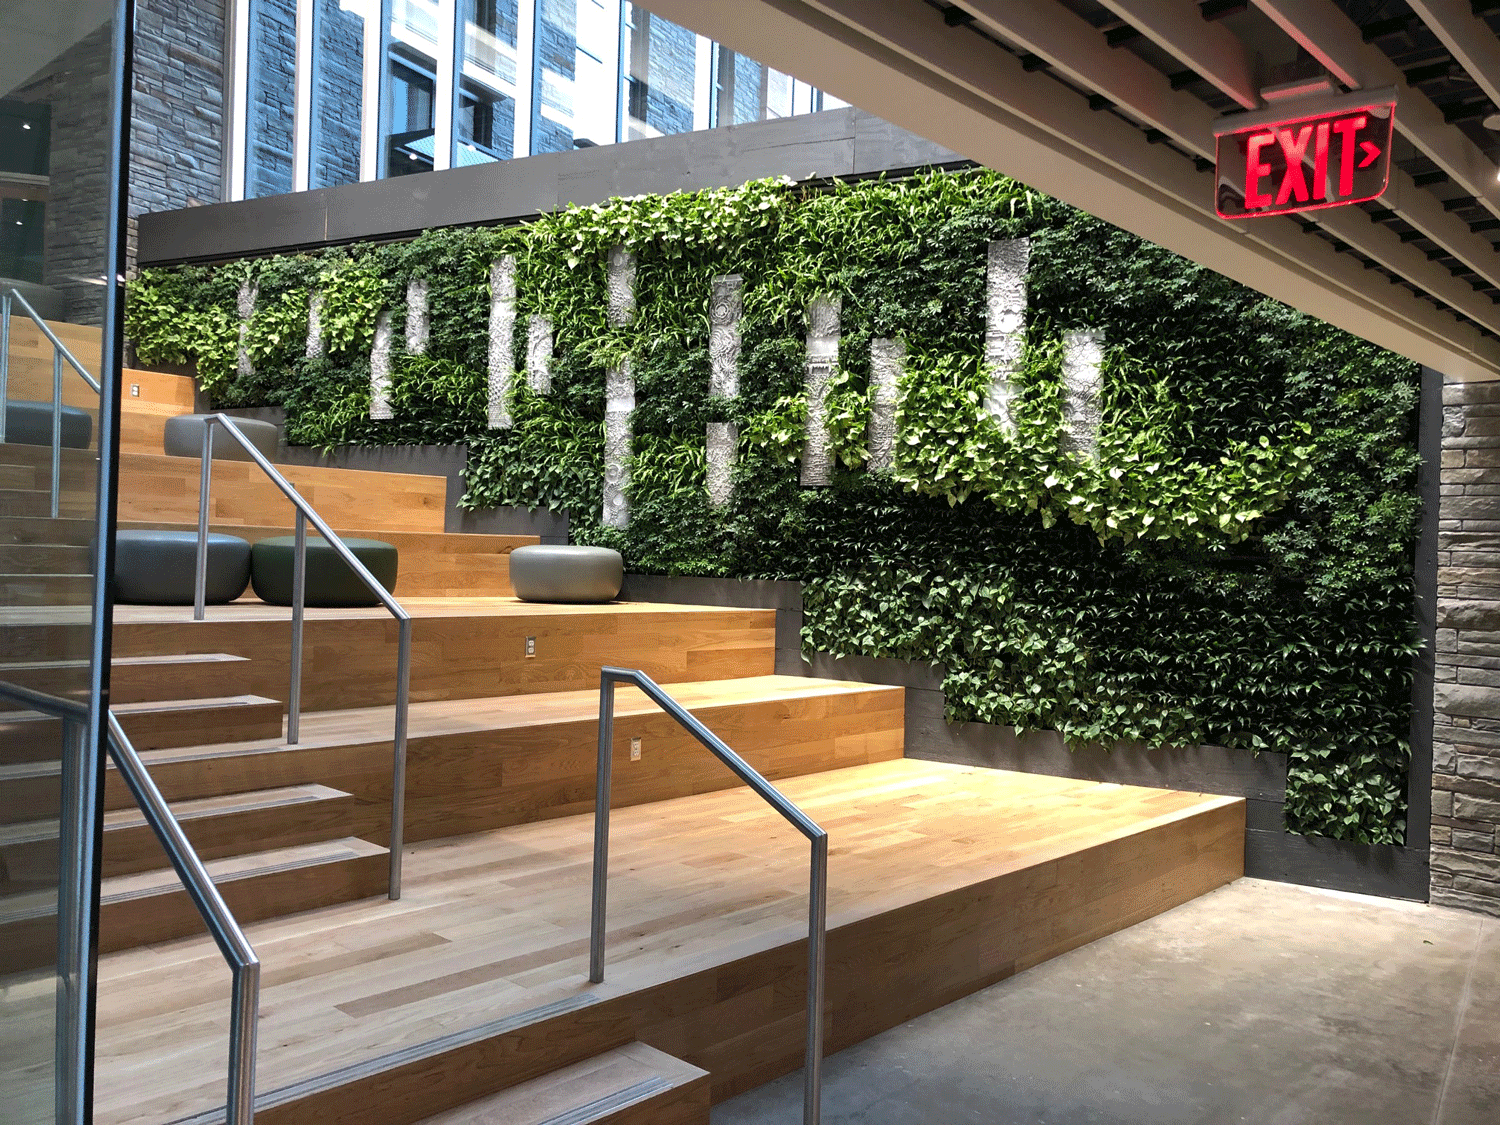 The Universities at Shady Grove (USG) Biomedical Sciences & Engineering Living Wall Featured Image